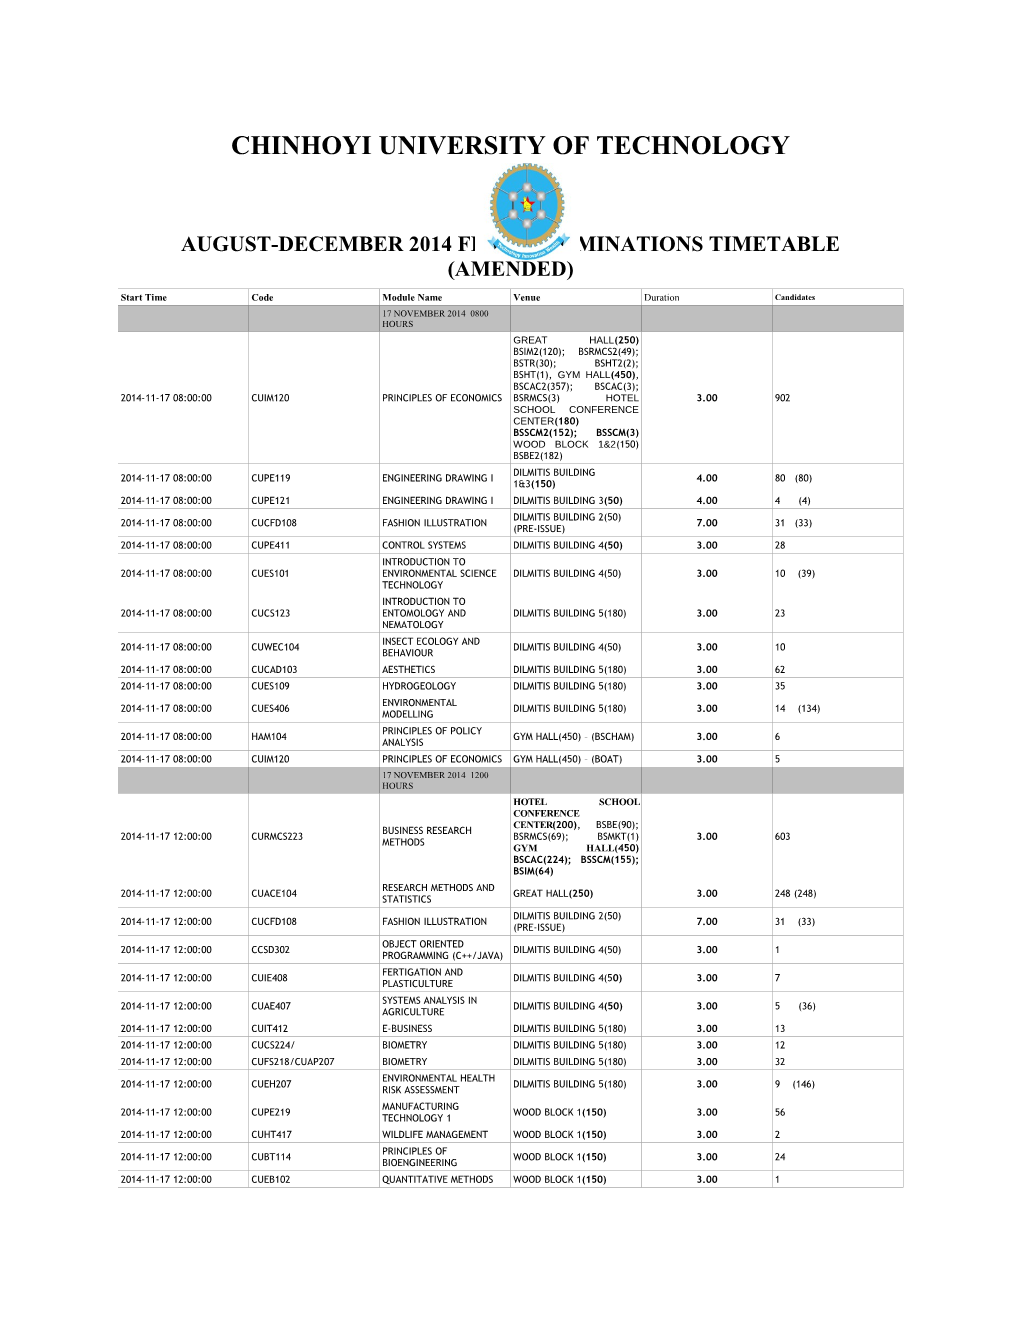 August-December 2014 Finalexaminations Timetable (Amended)